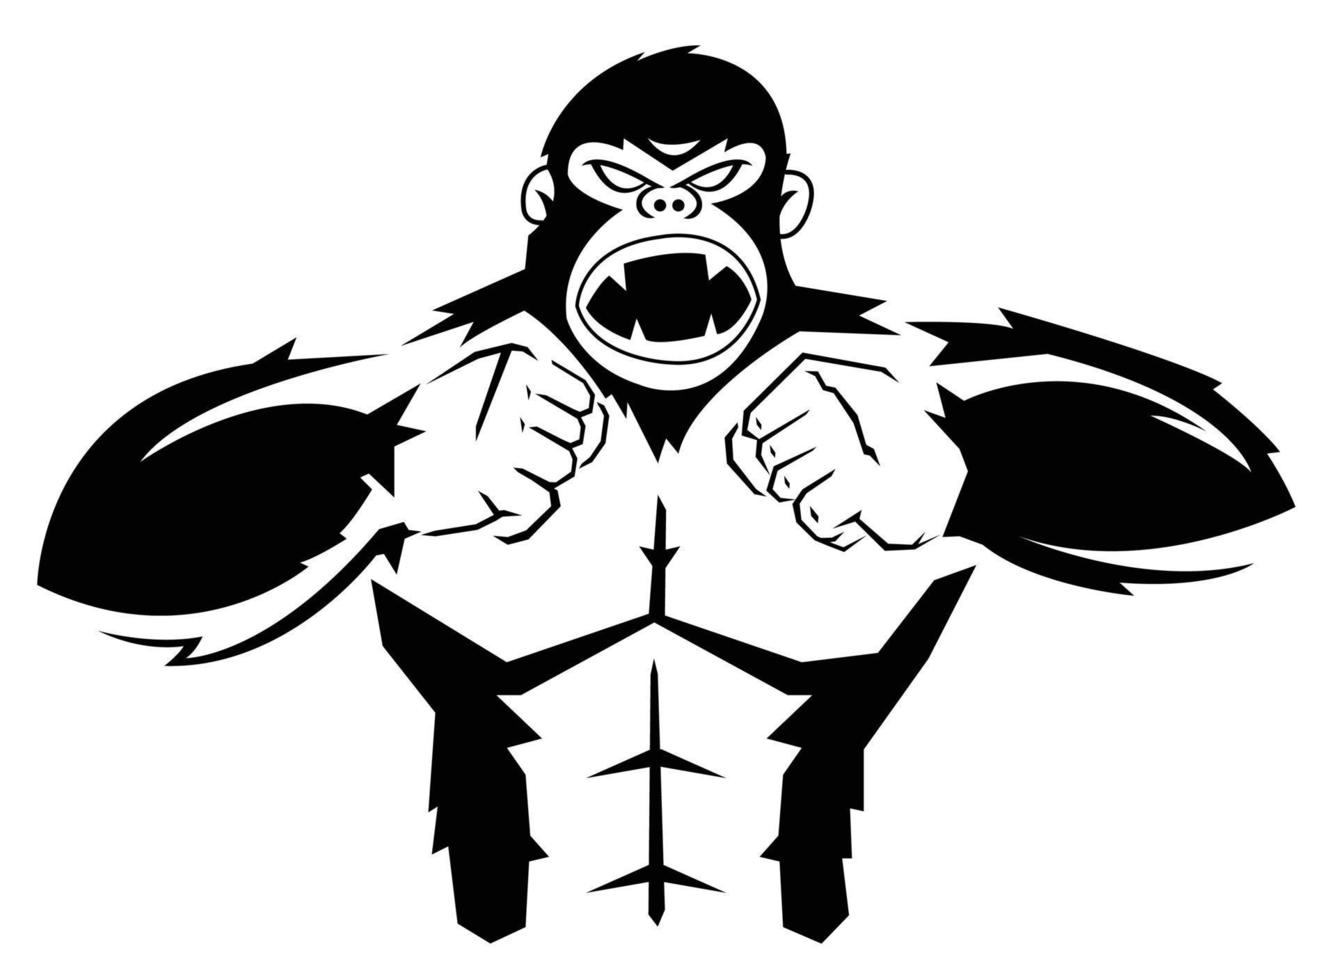 Monkey Face Silhouette Vector Art, Icons, and Graphics for Free Download